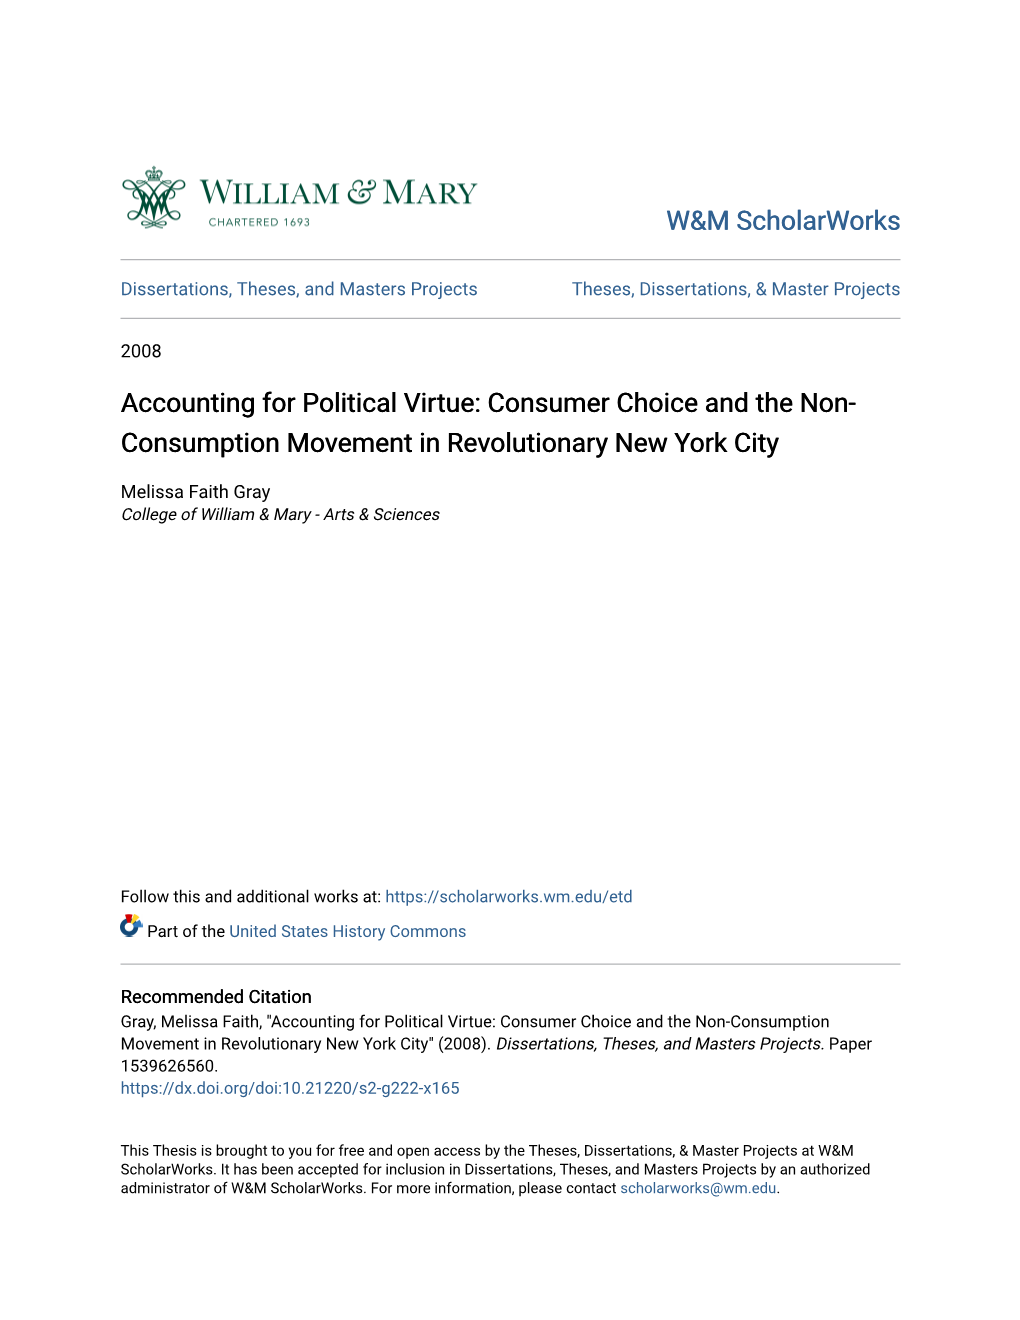 Consumer Choice and the Non-Consumption Movement in Revolutionary New York City" (2008)